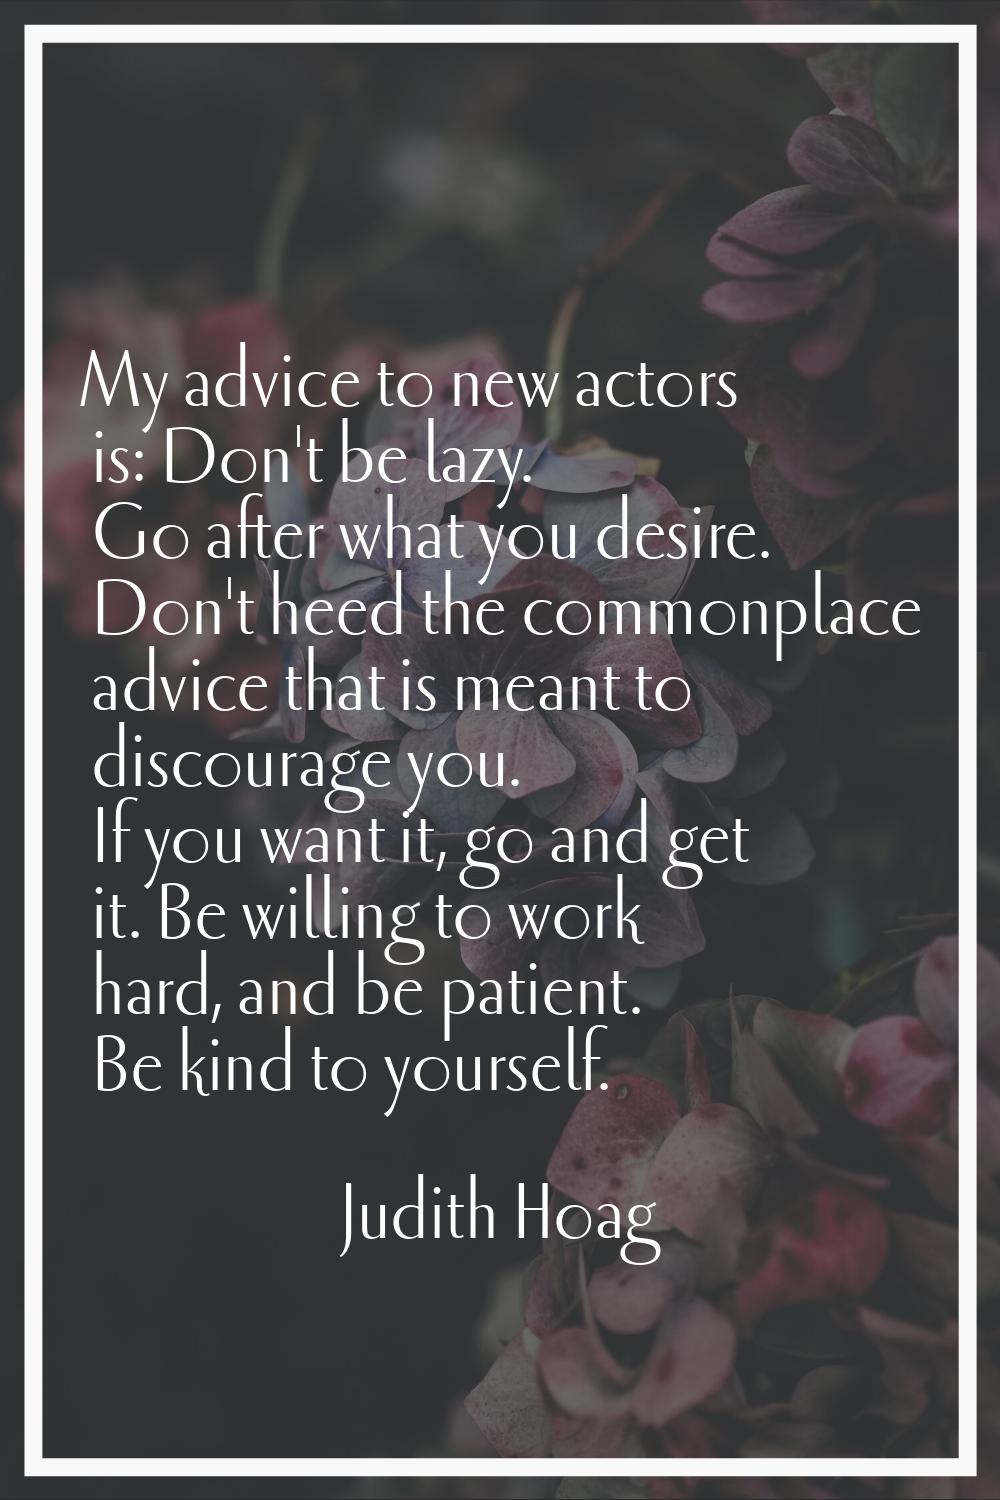 My advice to new actors is: Don't be lazy. Go after what you desire. Don't heed the commonplace adv